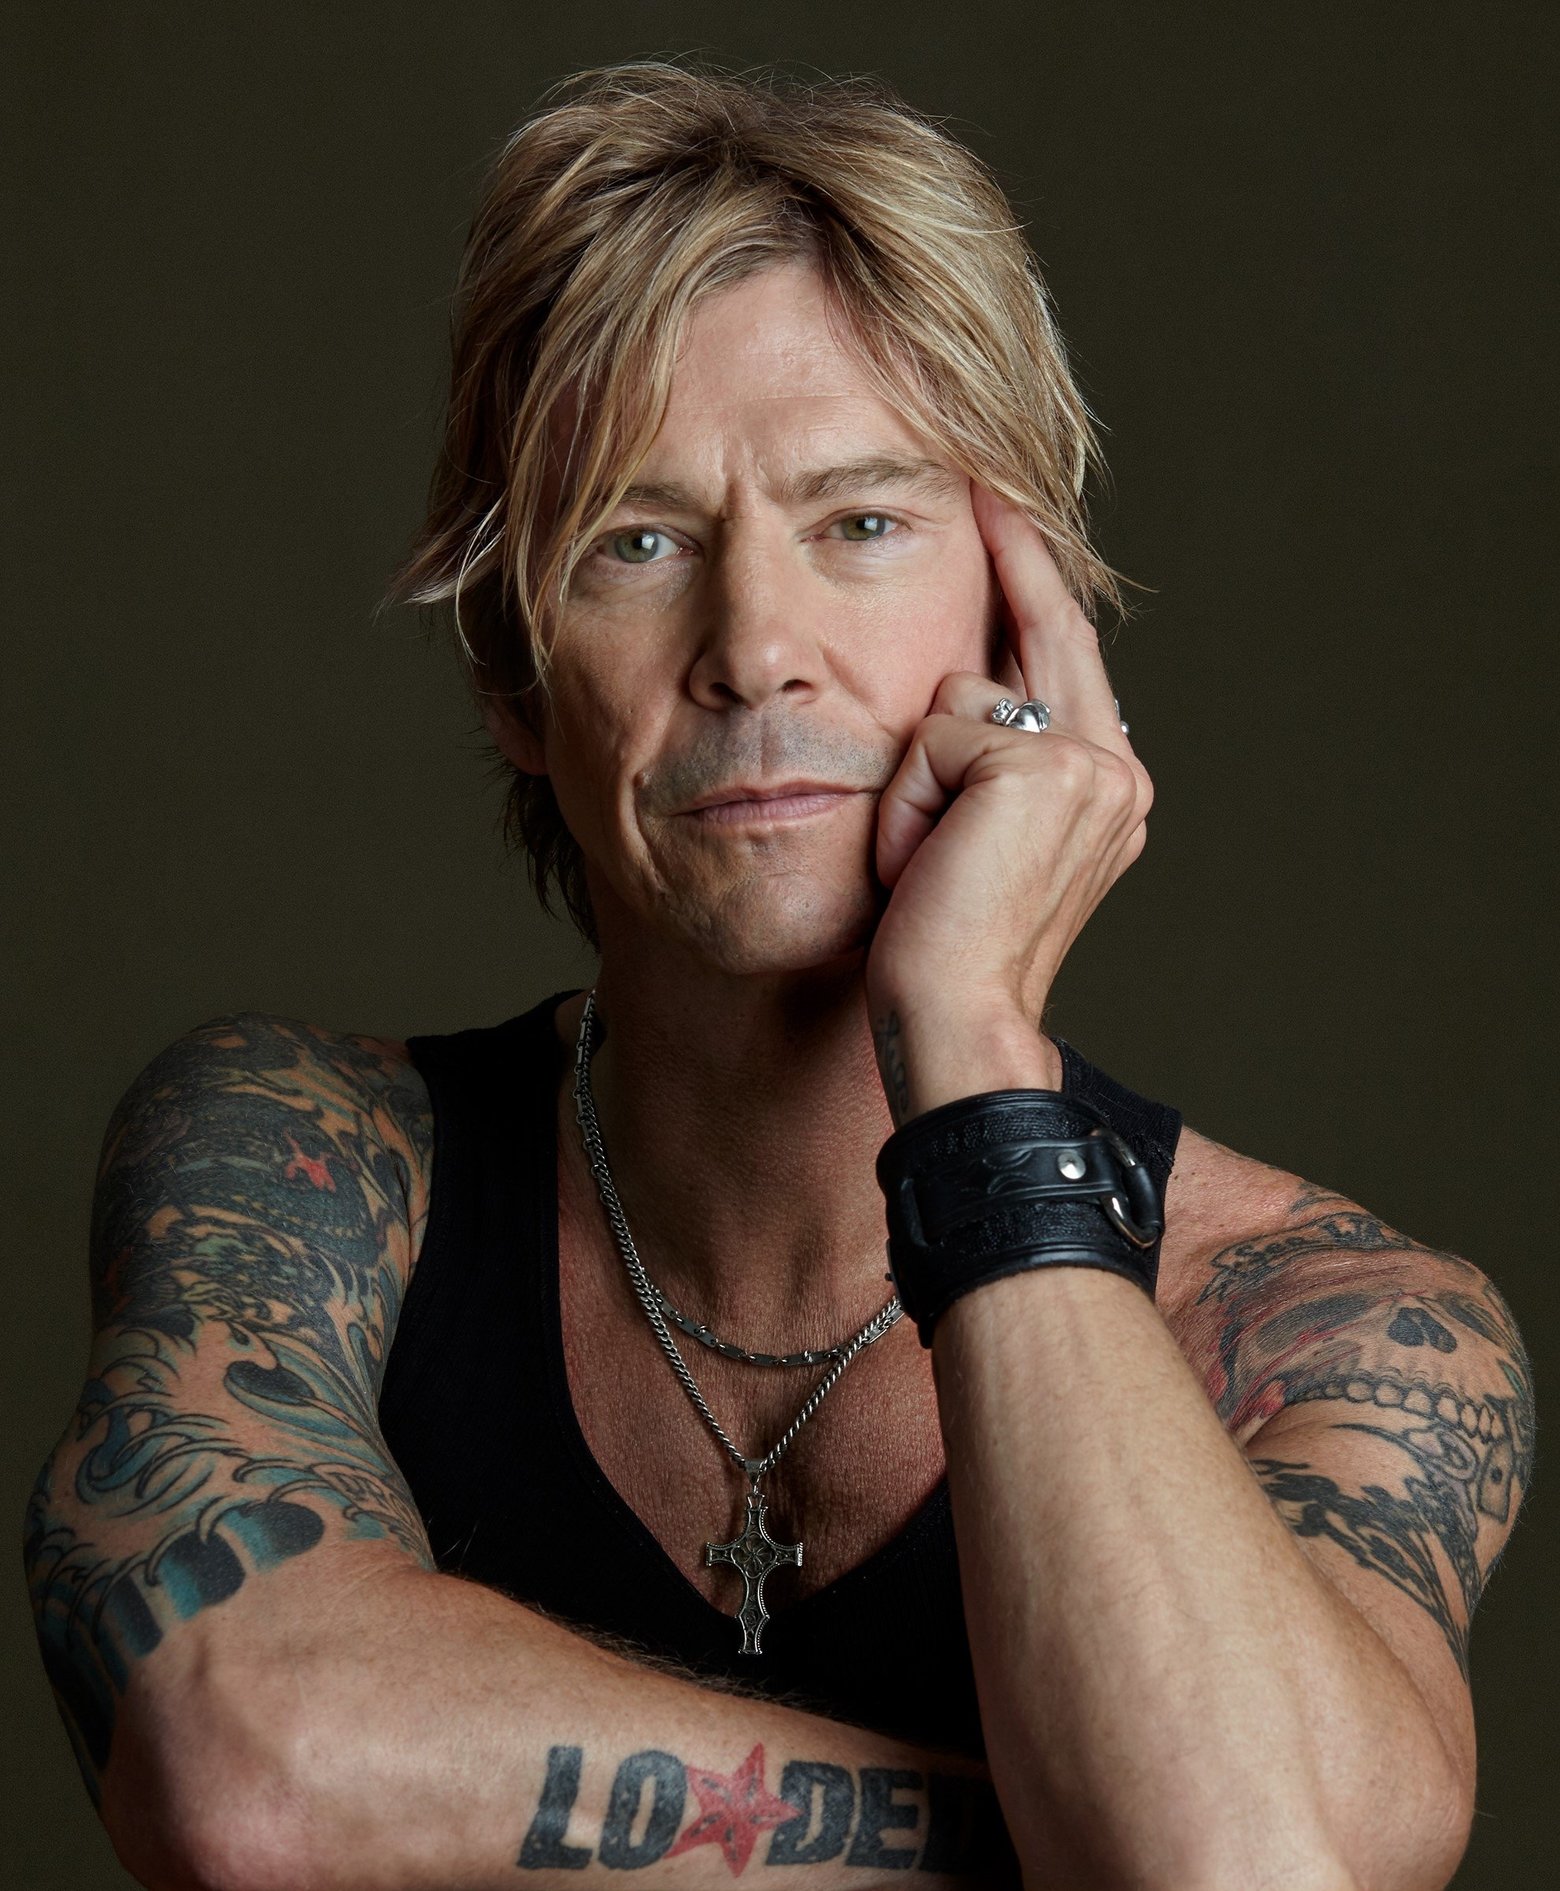 Please join me here at in wishing the one and only Duff McKagan a very Happy 57th Birthday today  